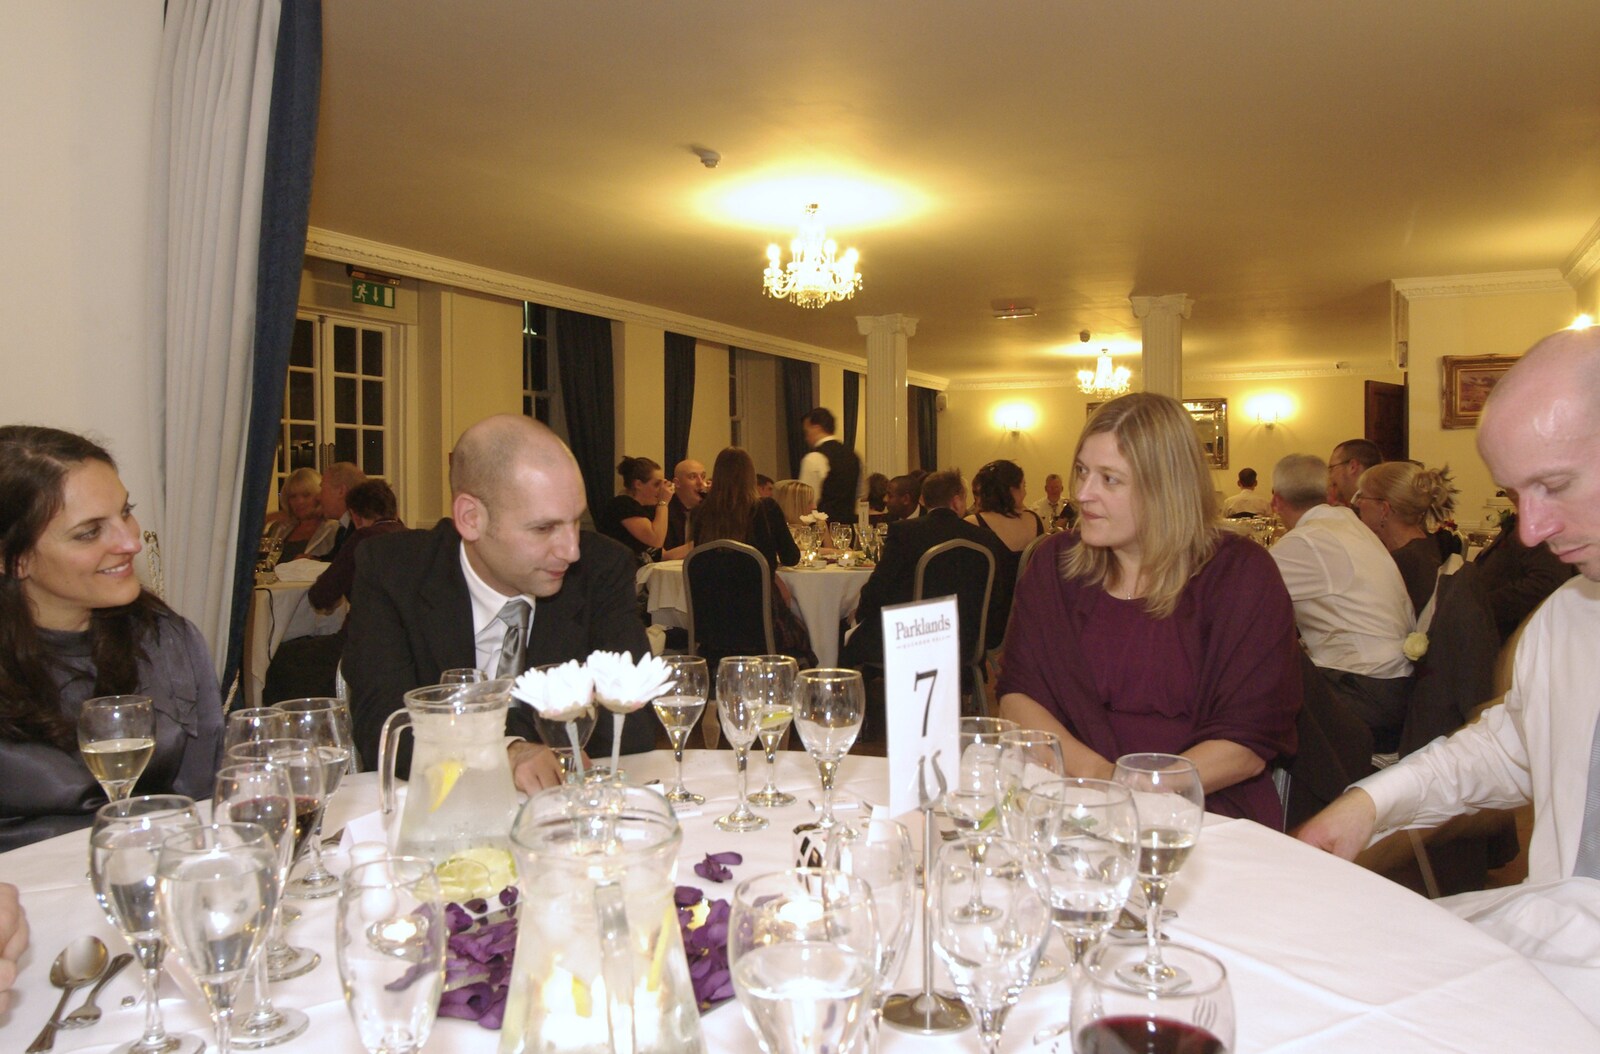 Matt and Emma's Wedding, Quendon, Essex - 7th November 2008: At the dinner table